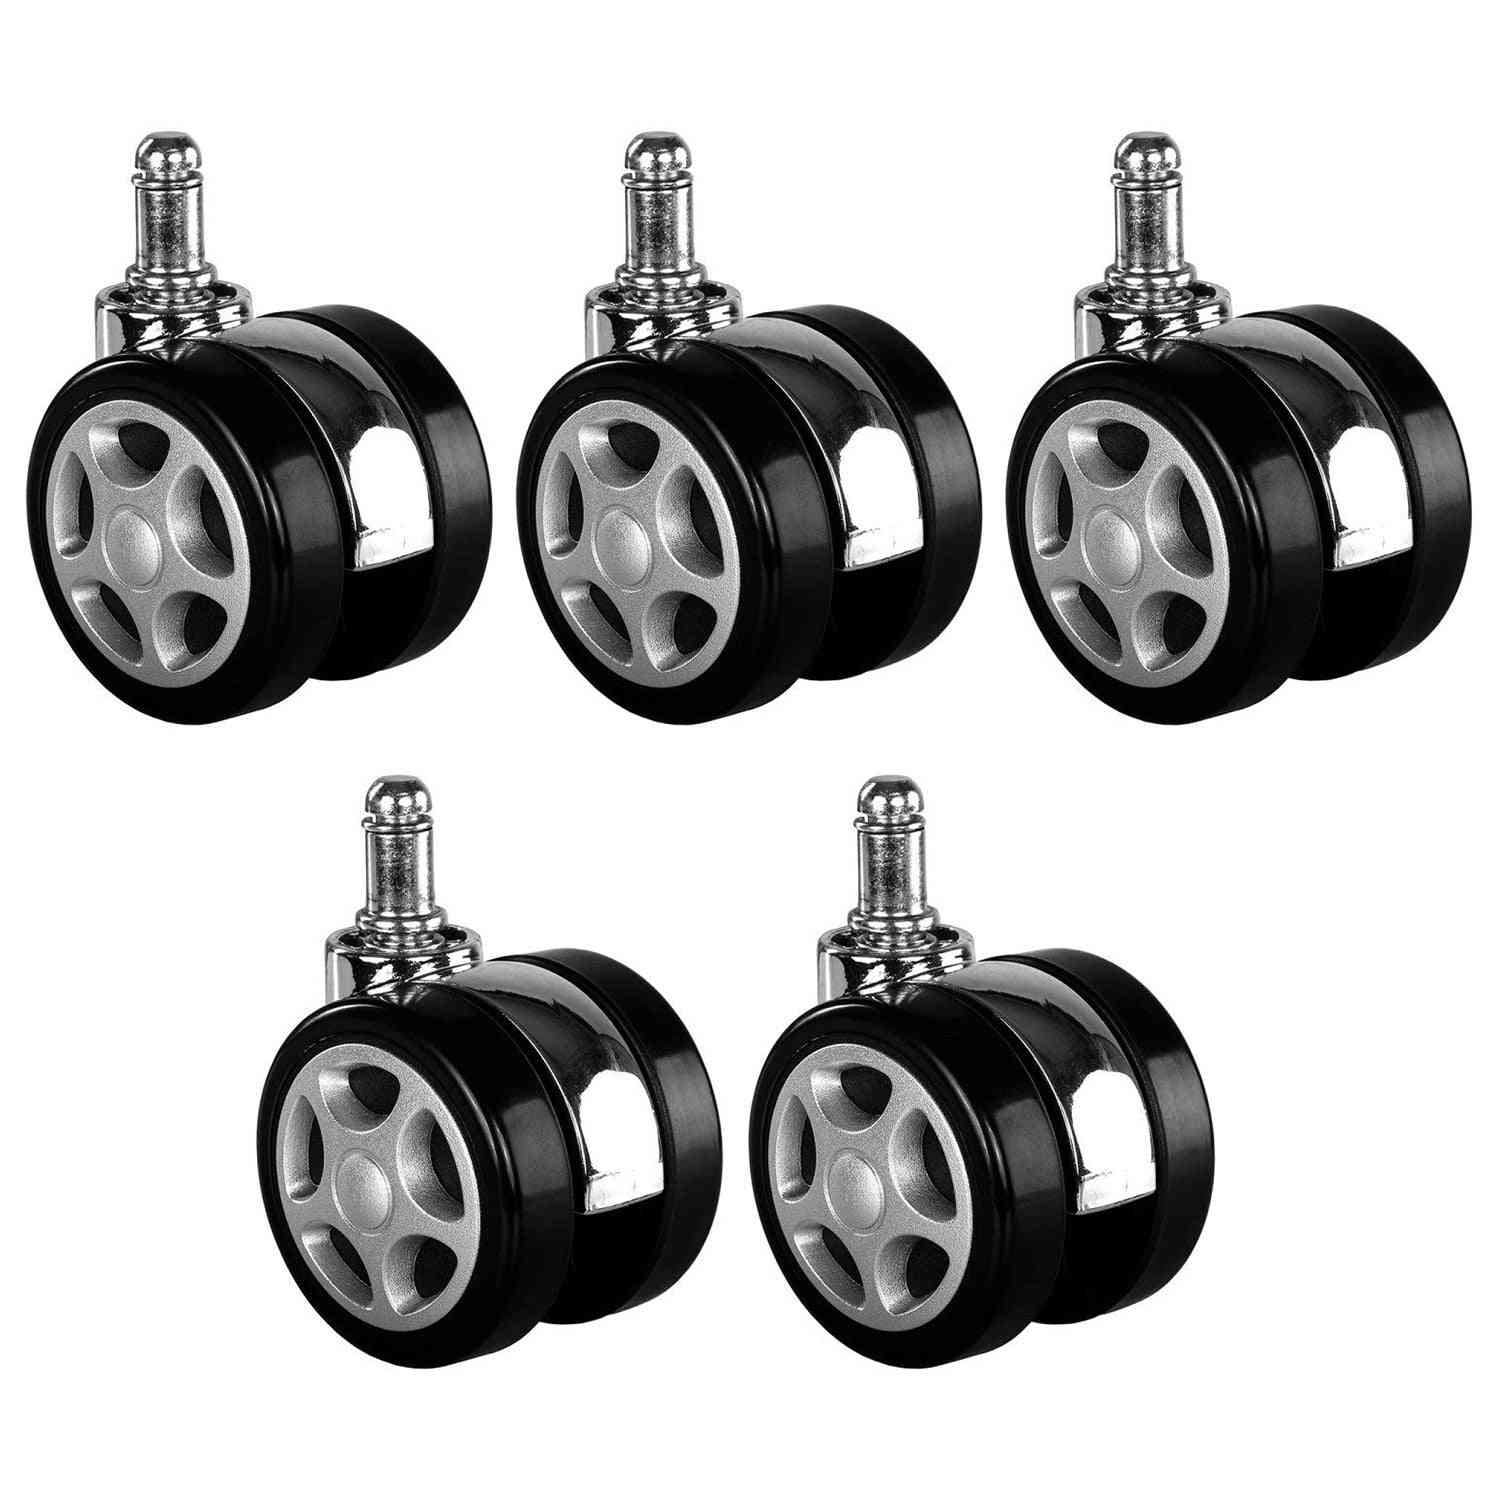 Universal Caster Swivel Rubber Rollers/wheels For Furniture